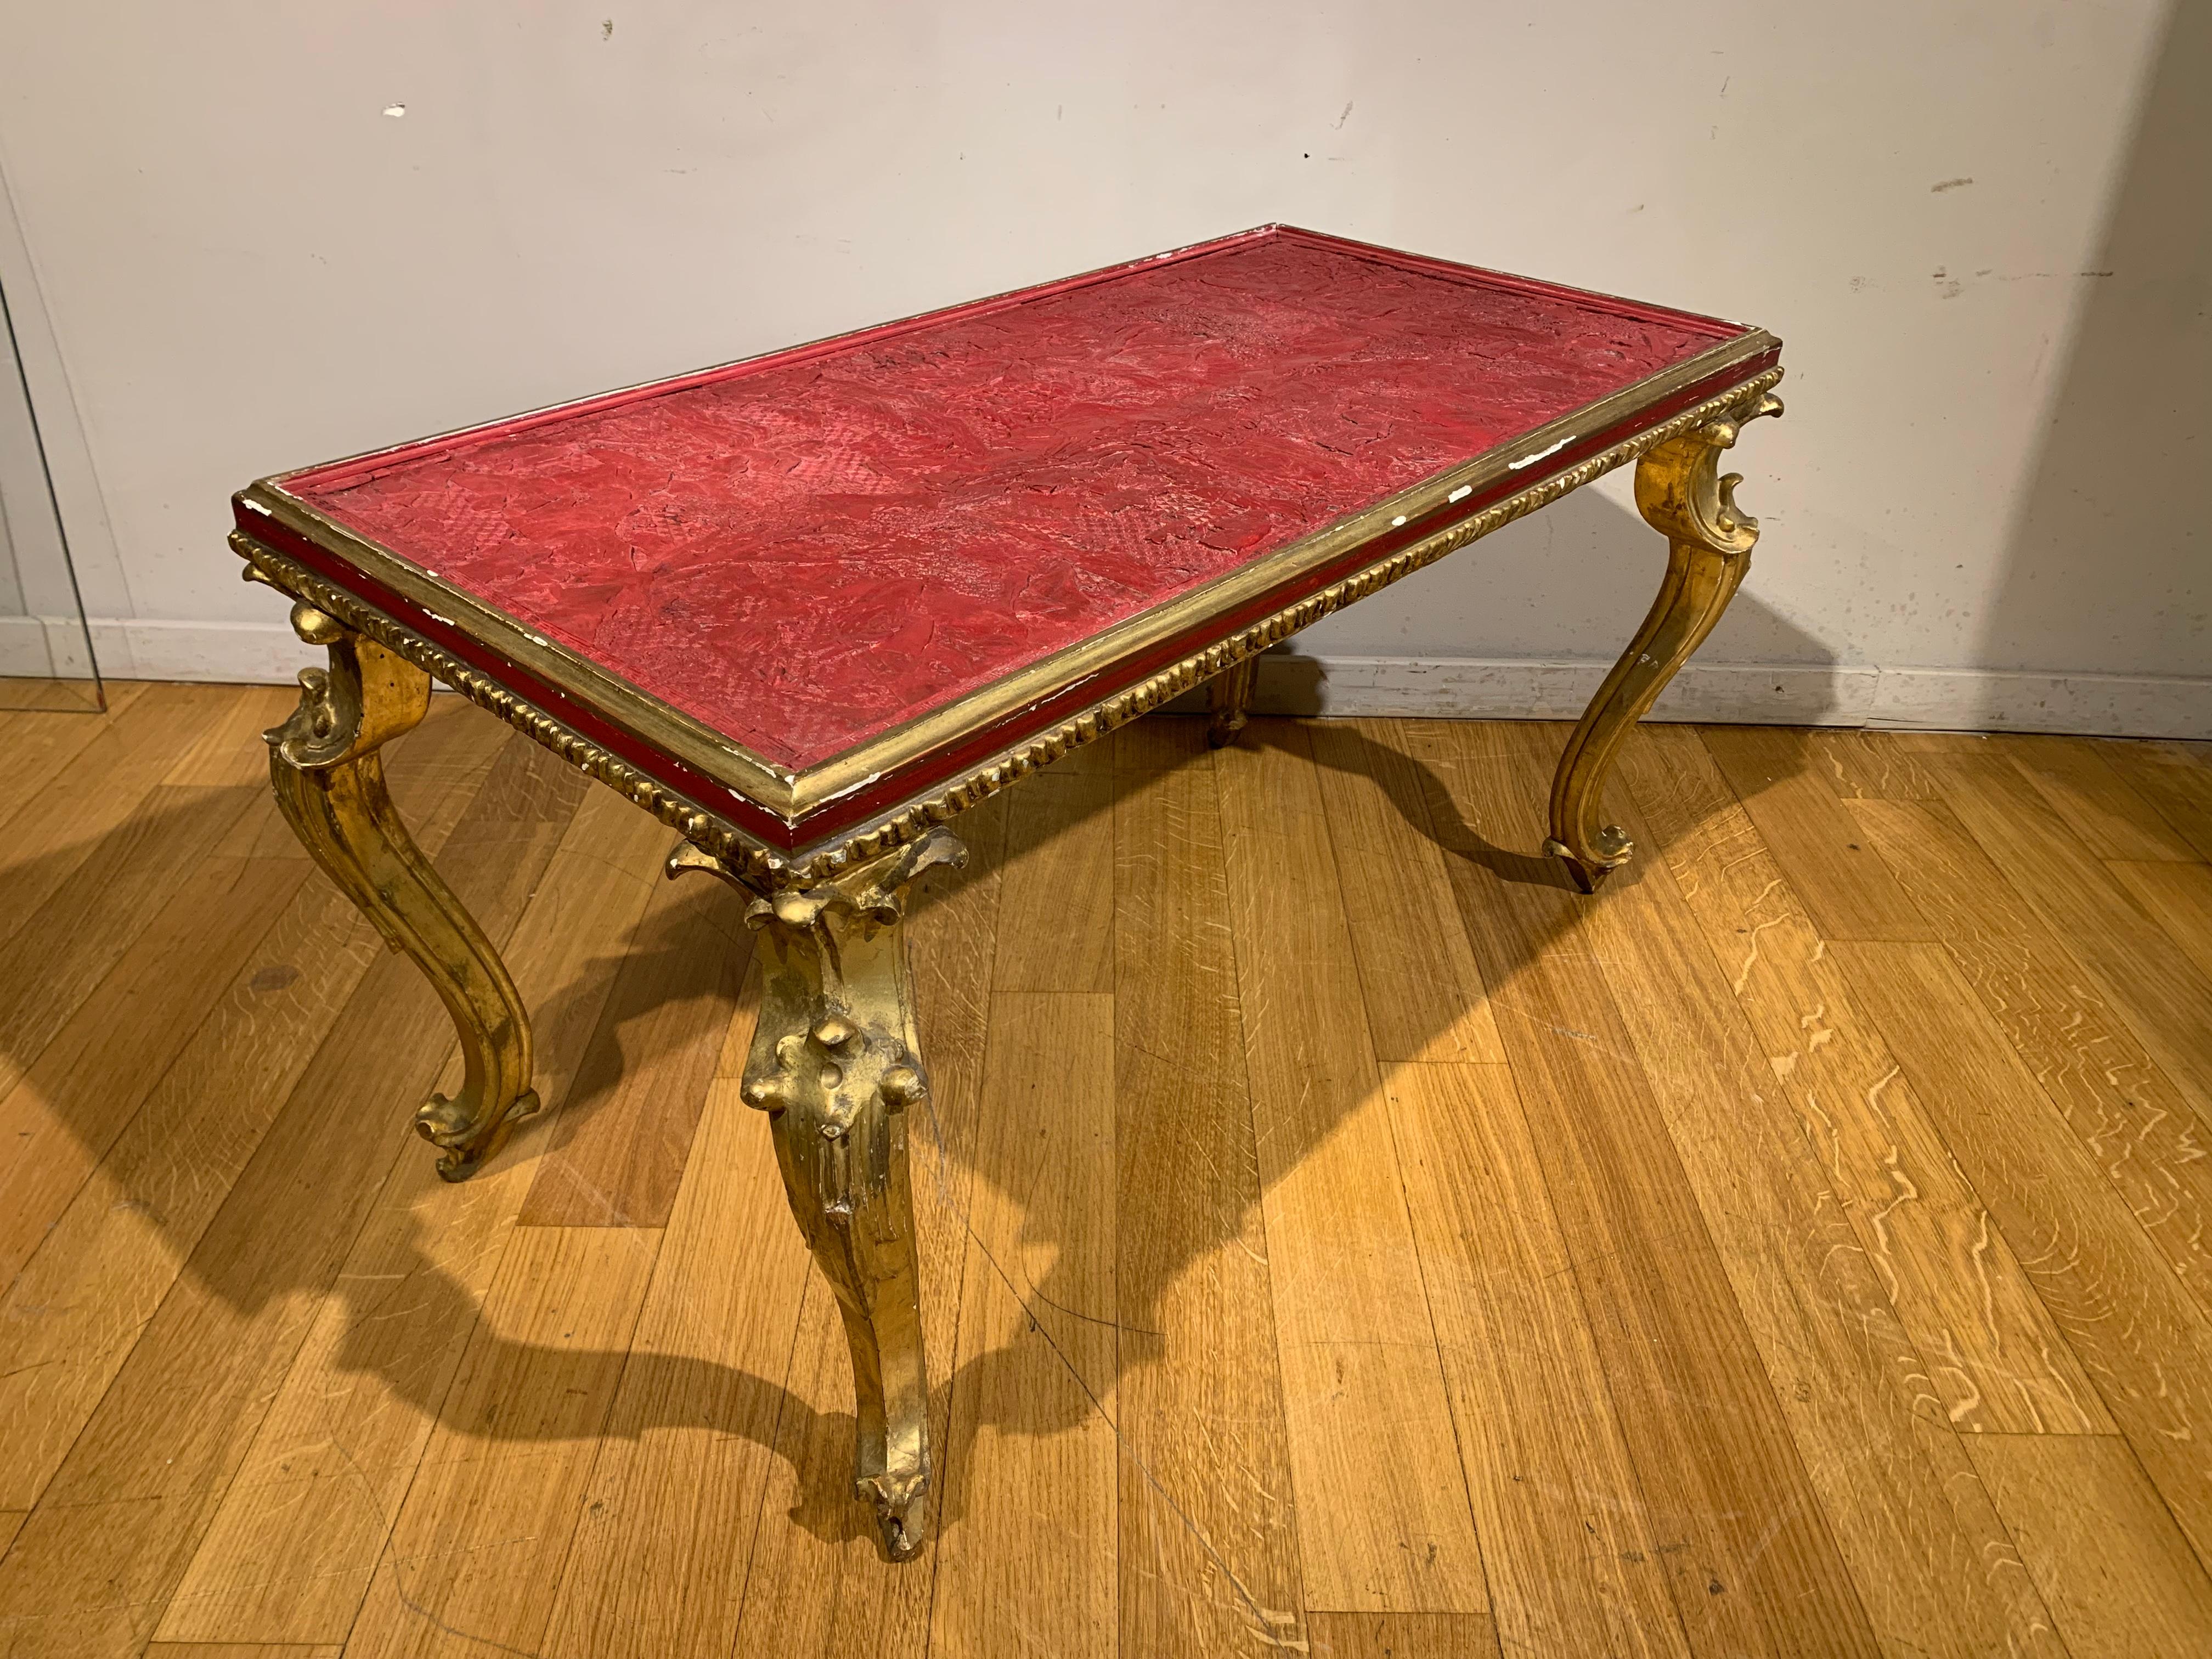 Elegant coffee table made up of four curved carved legs in the Louis XV style supporting a band in wood gilded with pure gold with a recessed top in engraved Chinese lacquer depicting scenes of imperial life.
The panel is certainly part of a door